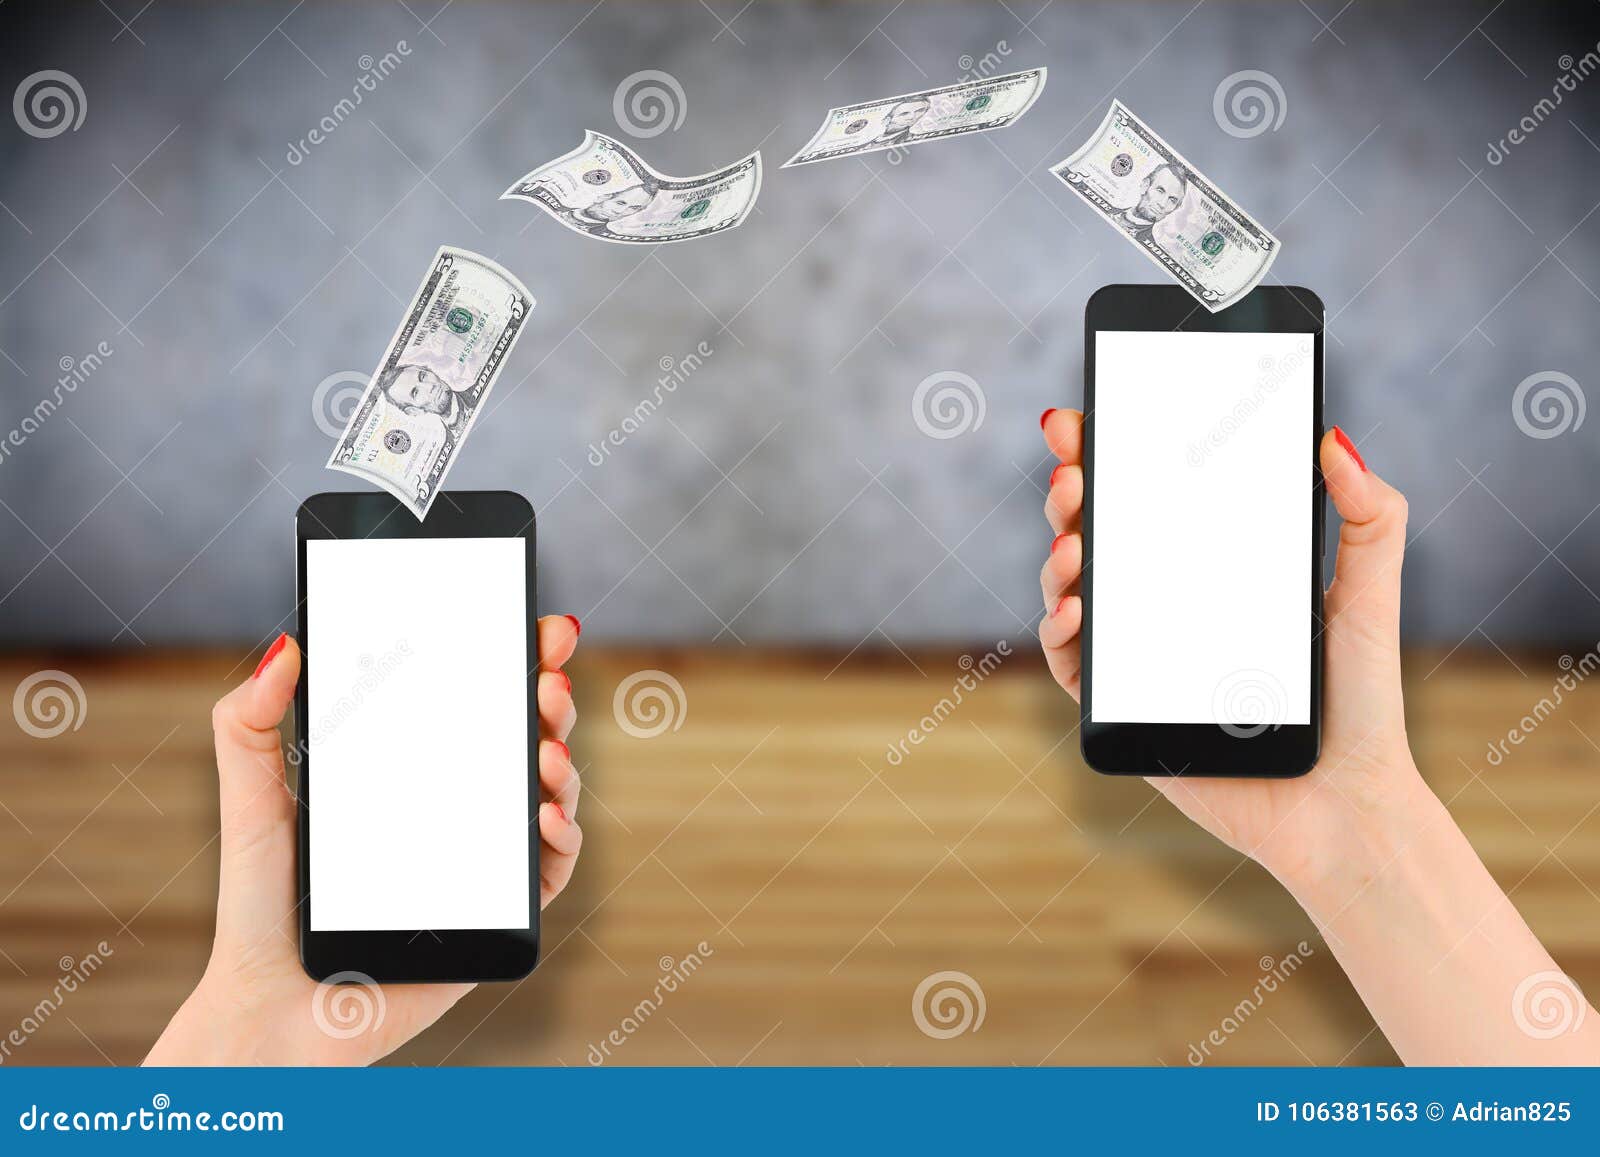 mobile payment or money transfer with smartphone, wooden background